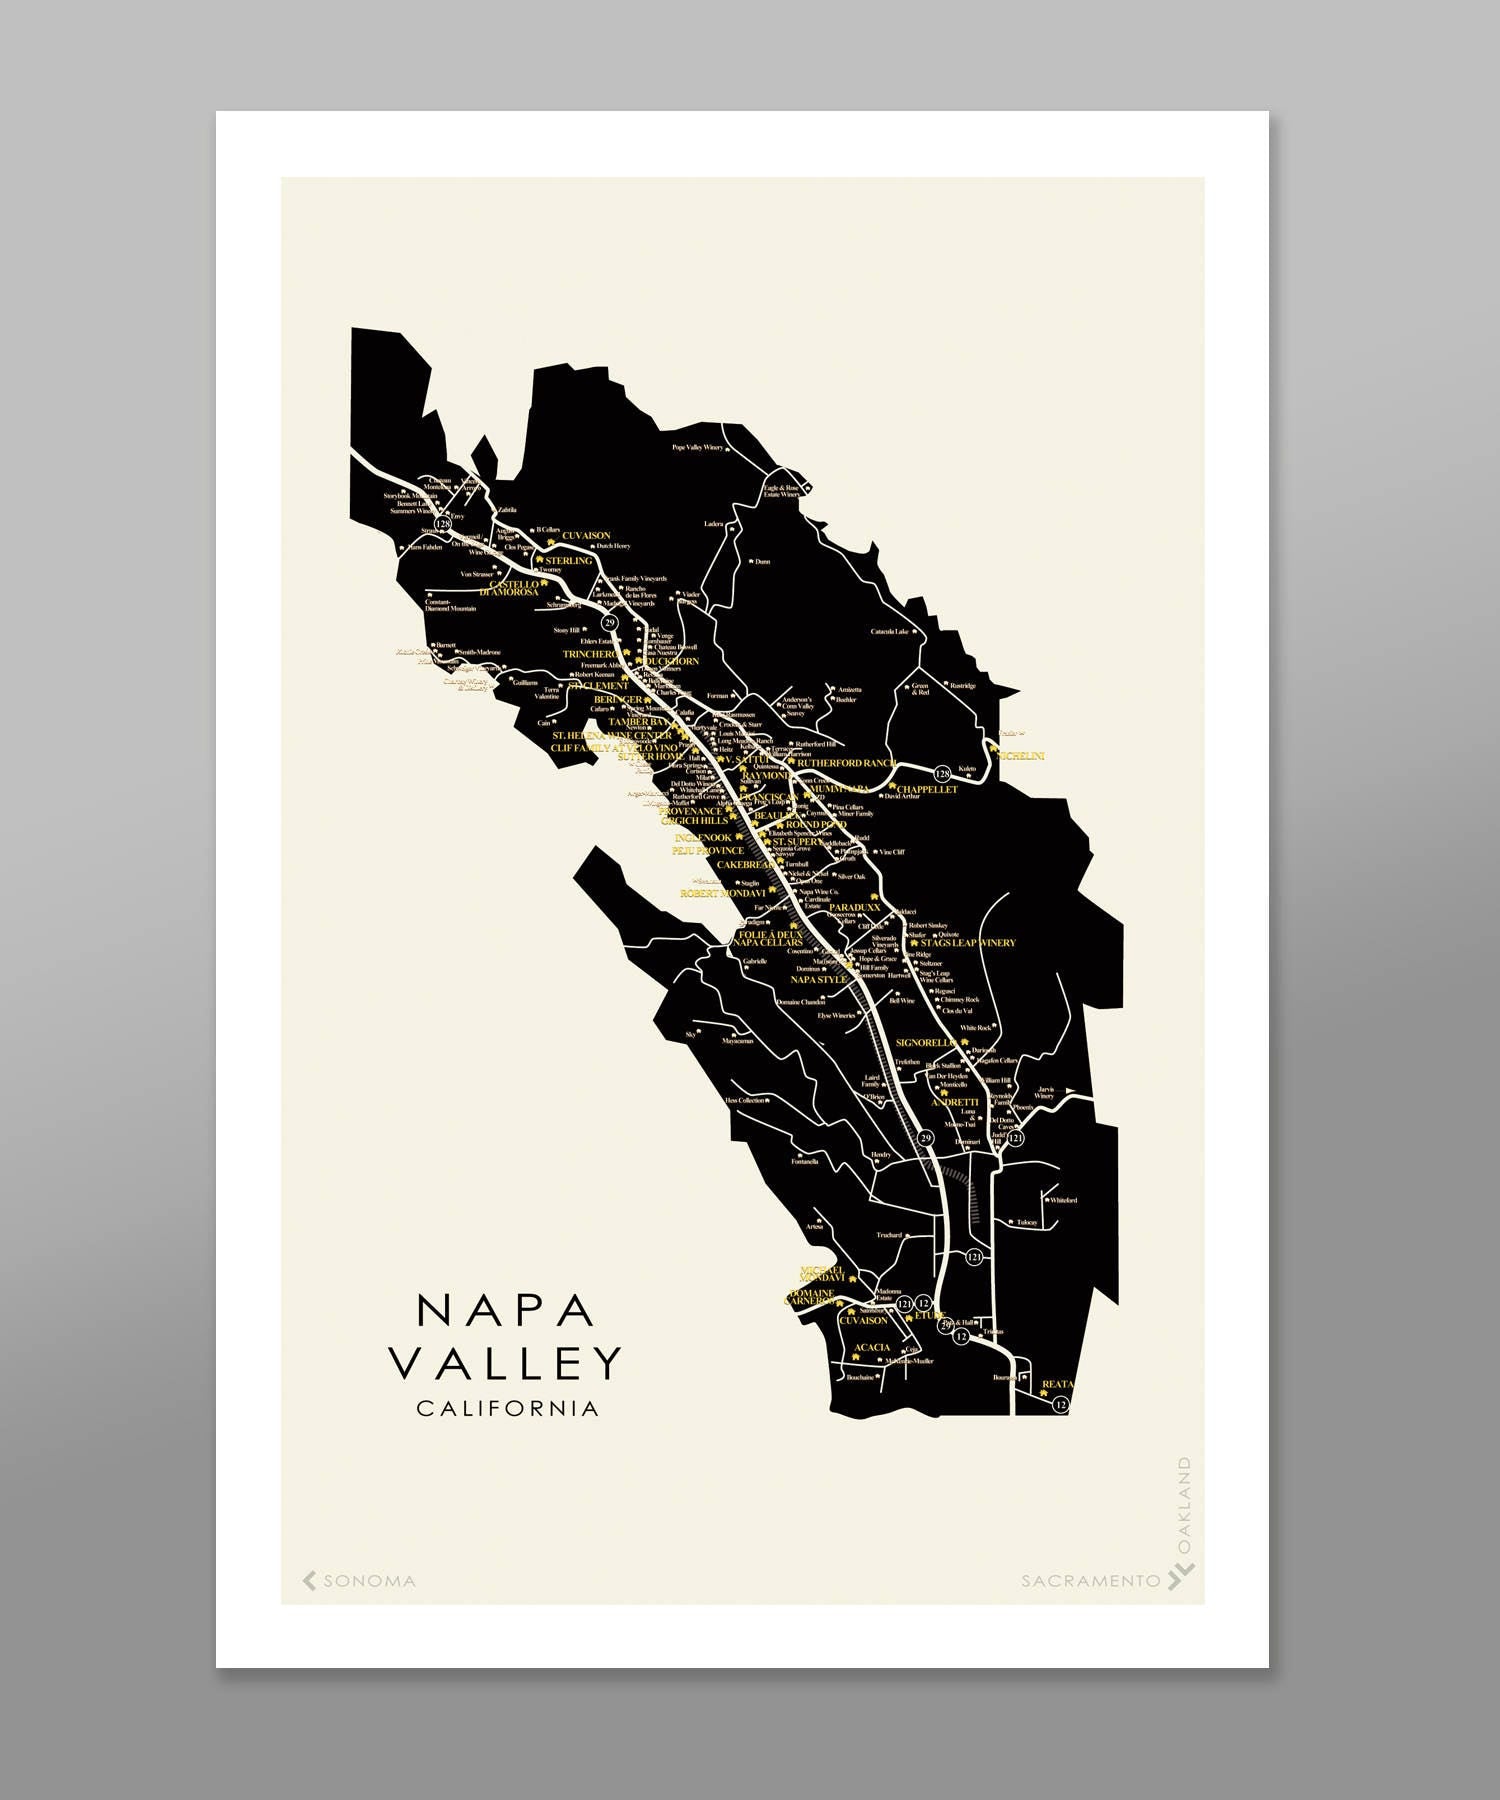 Napa Valley Wineries Minimalist Map - 13x19 16x24 or 24x36 Inches - Home Decor